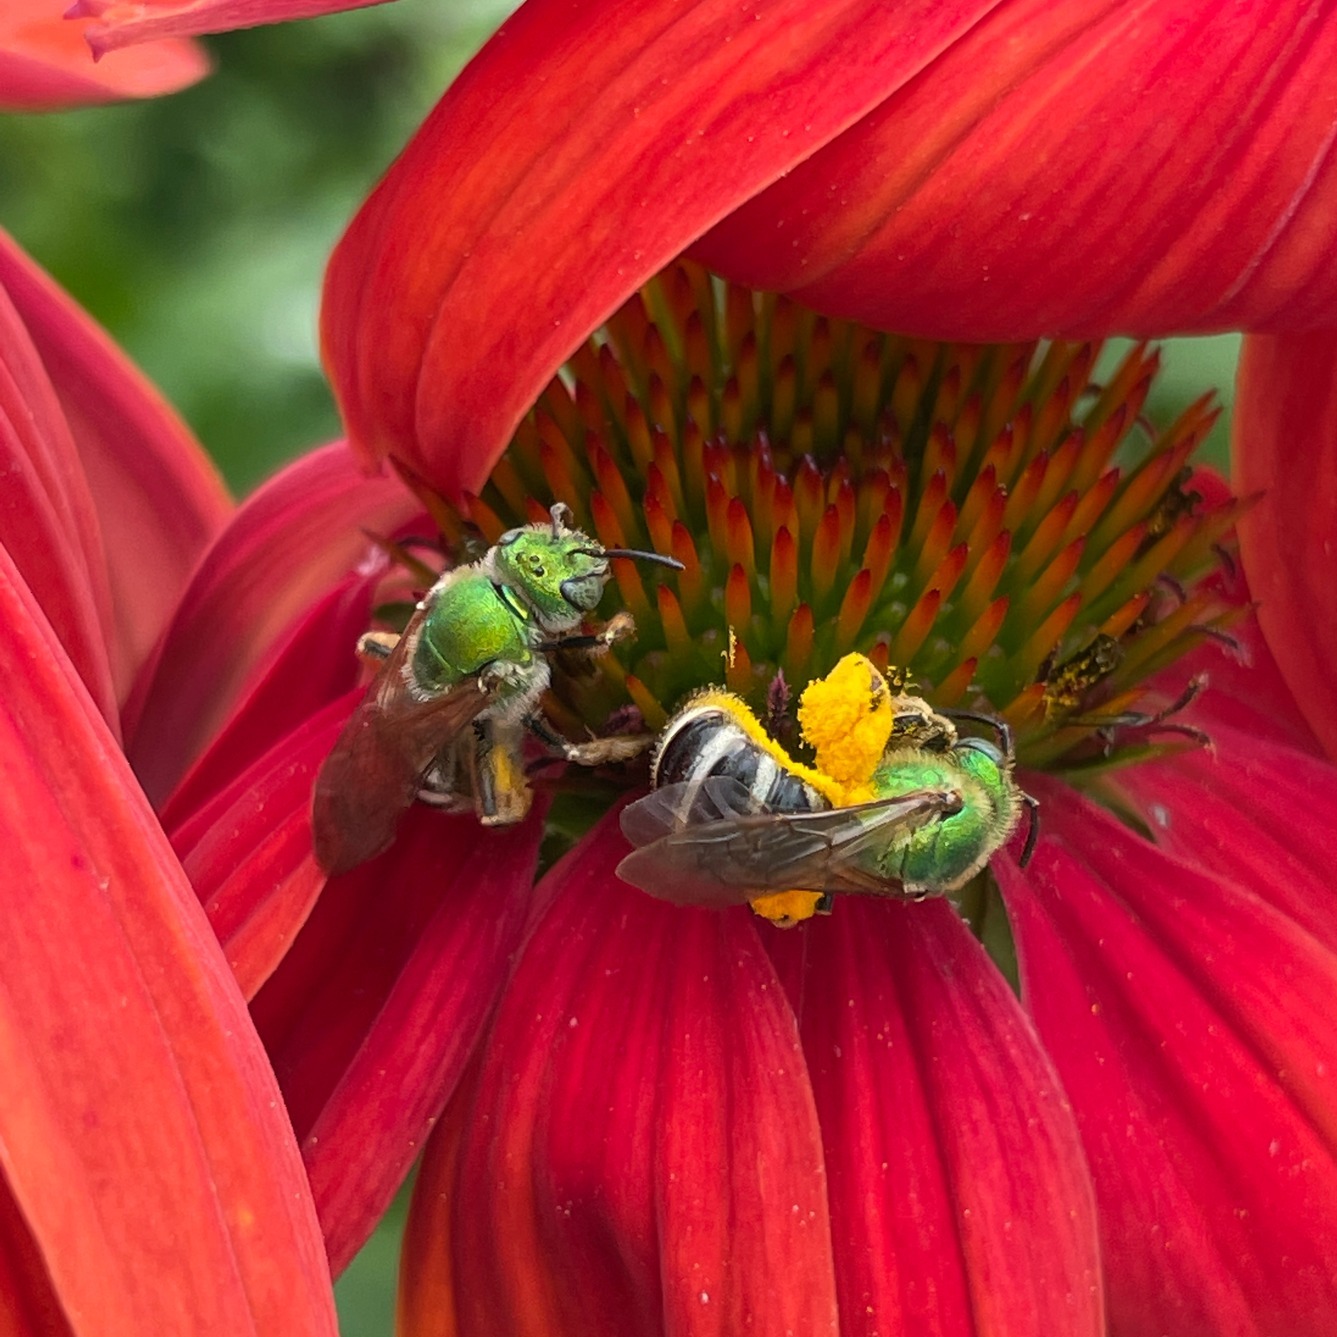 Two female bicolored striped sweat bees on a red echinacea flower